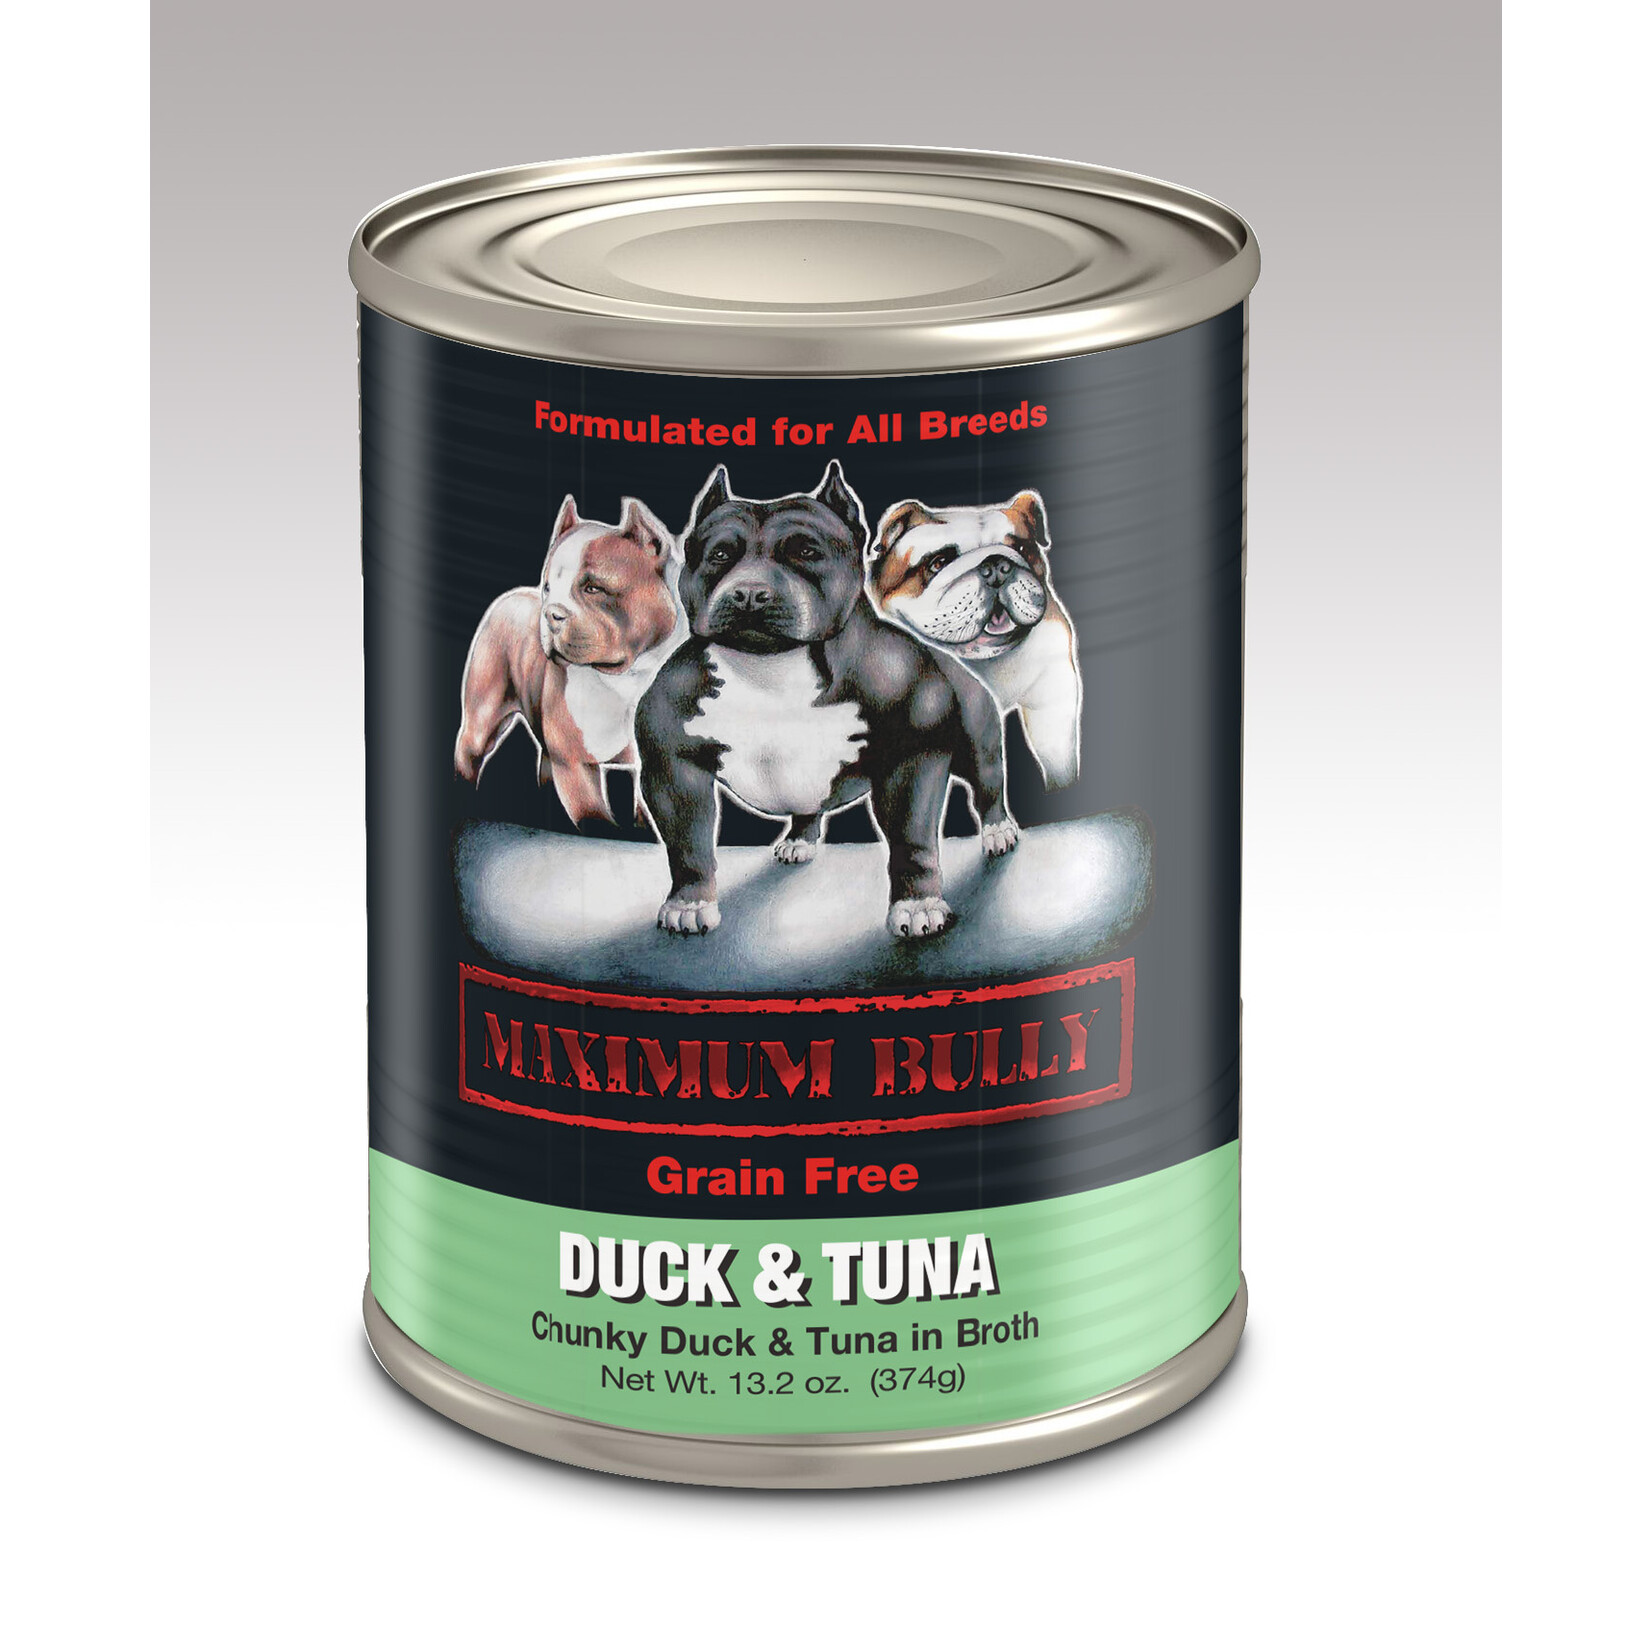 Maximum Bully Chunky Duck and Tuna in Broth Canned Dog Food, 13.2oz